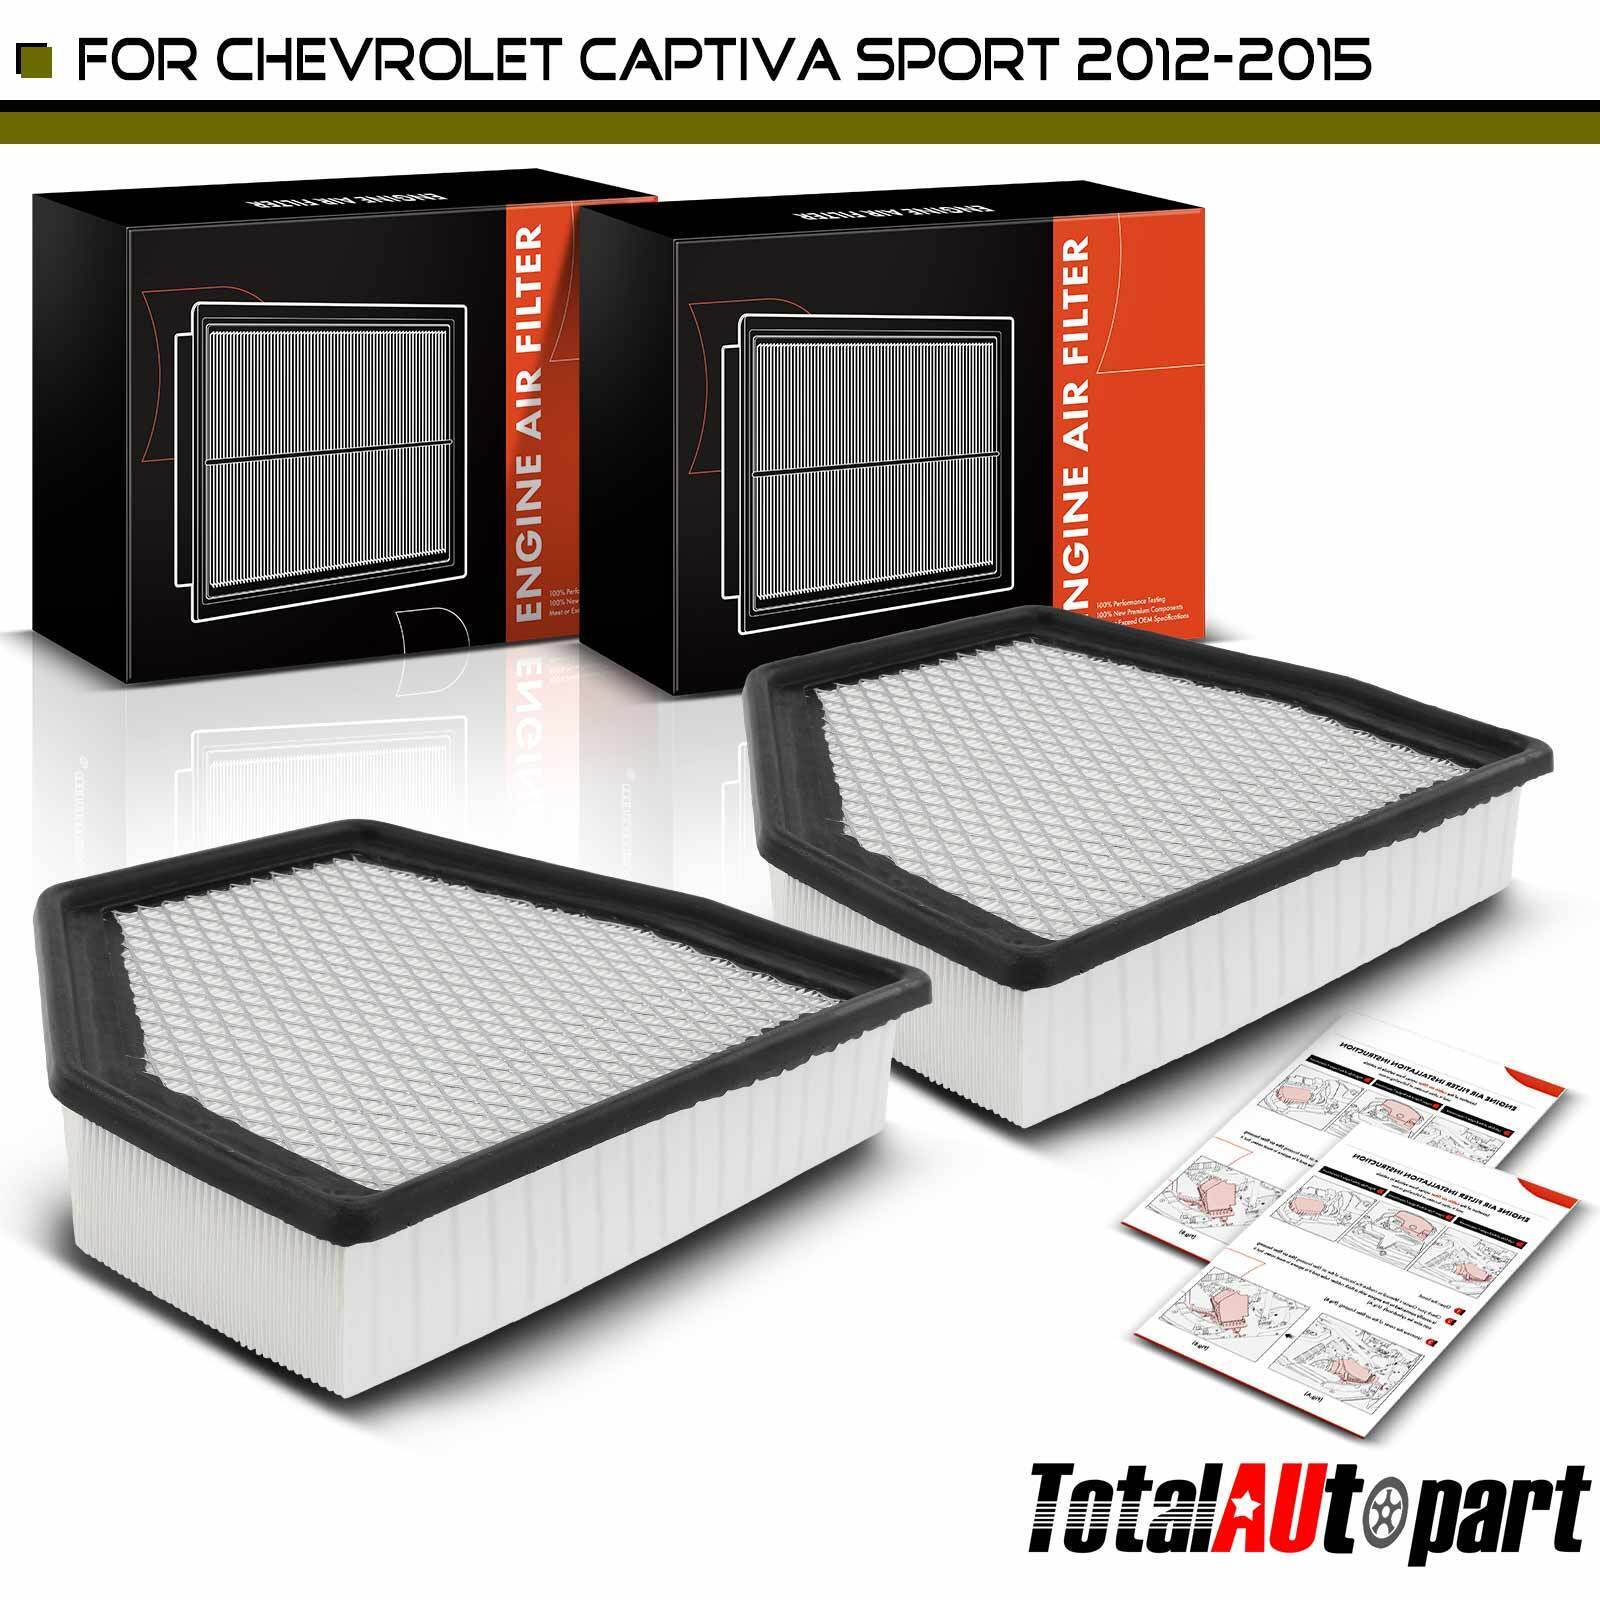 New 2x Engine Air Filter for Chevy Captiva Sport 2012-2015 Saturn Vue 2008-2010